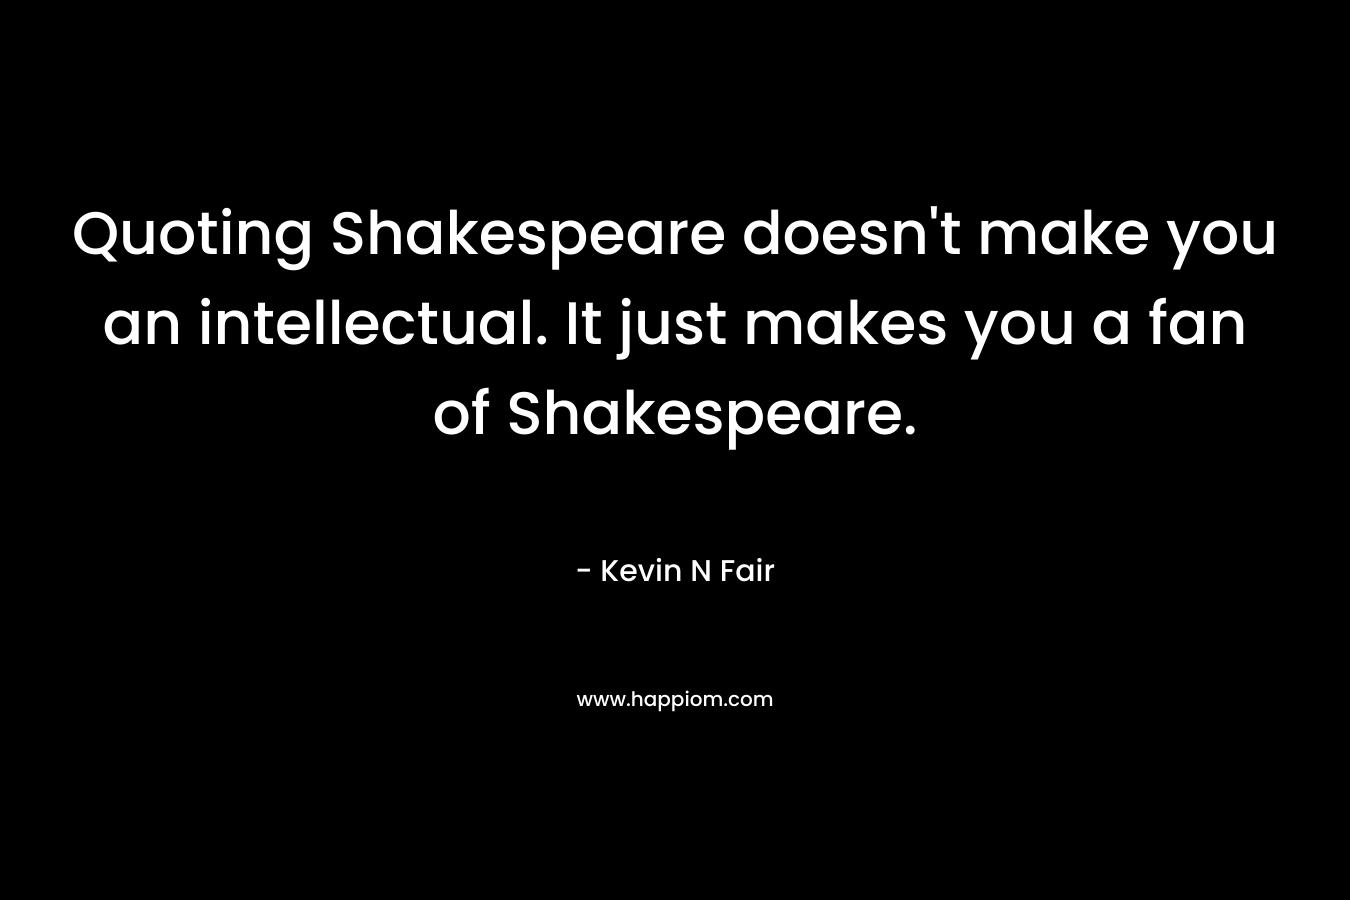 Quoting Shakespeare doesn’t make you an intellectual. It just makes you a fan of Shakespeare. – Kevin N Fair